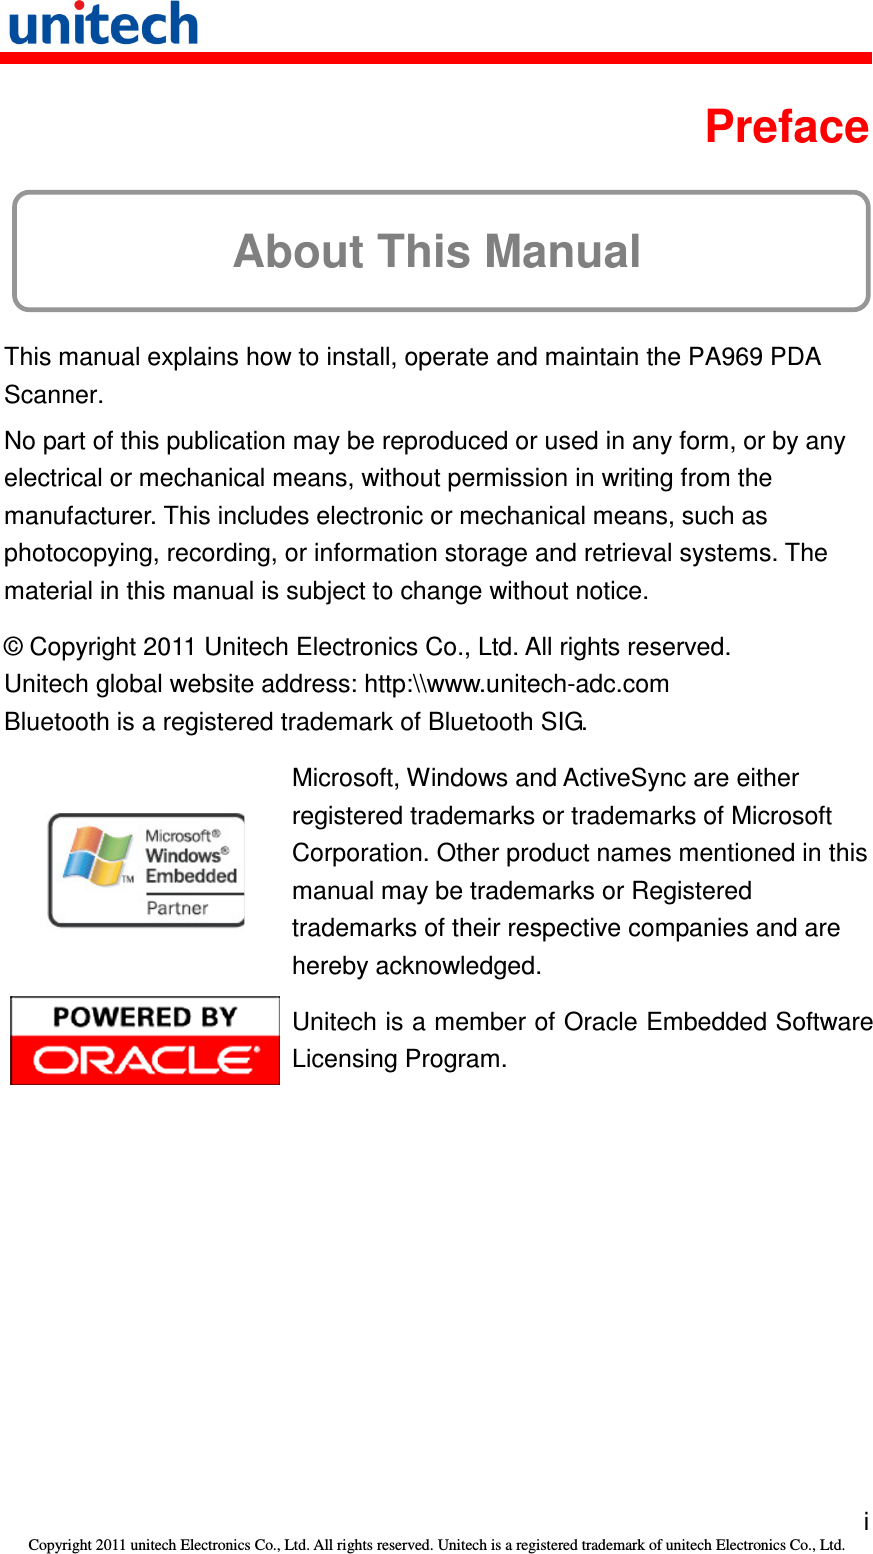   i Copyright 2011 unitech Electronics Co., Ltd. All rights reserved. Unitech is a registered trademark of unitech Electronics Co., Ltd.  Preface About This Manual This manual explains how to install, operate and maintain the PA969 PDA Scanner. No part of this publication may be reproduced or used in any form, or by any electrical or mechanical means, without permission in writing from the manufacturer. This includes electronic or mechanical means, such as photocopying, recording, or information storage and retrieval systems. The material in this manual is subject to change without notice. © Copyright 2011 Unitech Electronics Co., Ltd. All rights reserved. Unitech global website address: http:\\www.unitech-adc.com Bluetooth is a registered trademark of Bluetooth SIG.  Microsoft, Windows and ActiveSync are either registered trademarks or trademarks of Microsoft Corporation. Other product names mentioned in this manual may be trademarks or Registered trademarks of their respective companies and are hereby acknowledged.  Unitech is a member of Oracle Embedded Software Licensing Program. 